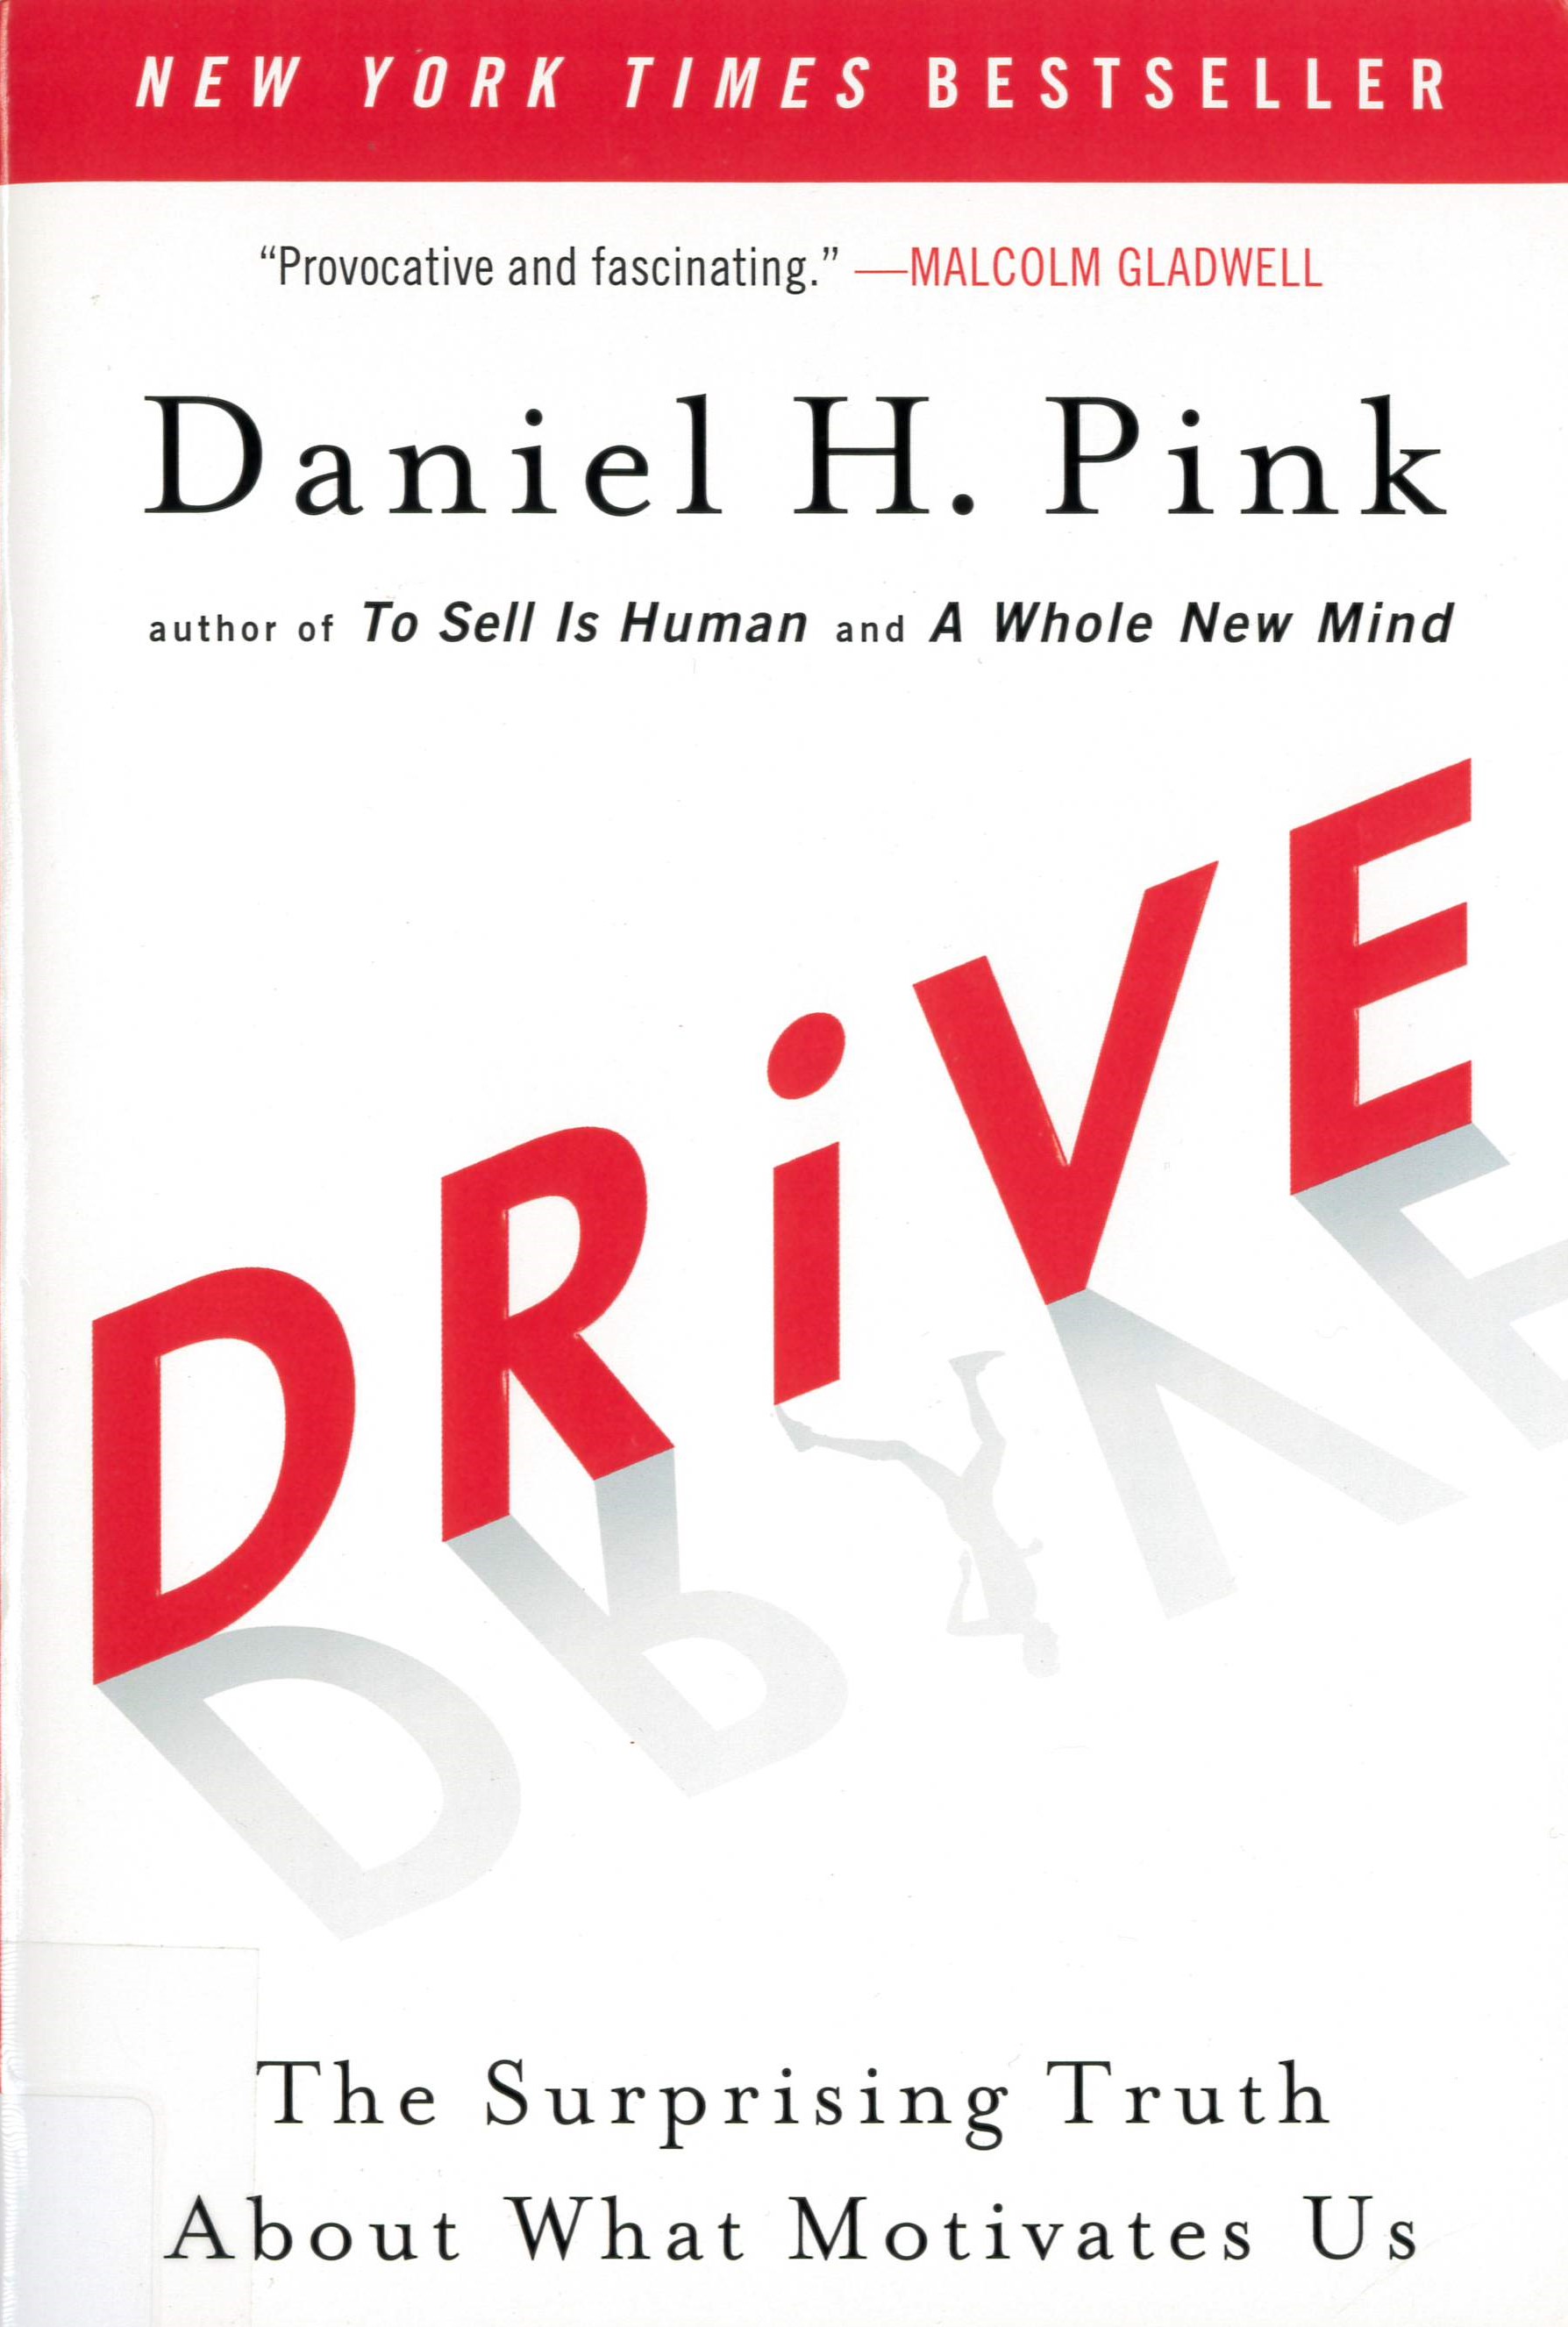 Drive : the surprising truth about what motivates us /